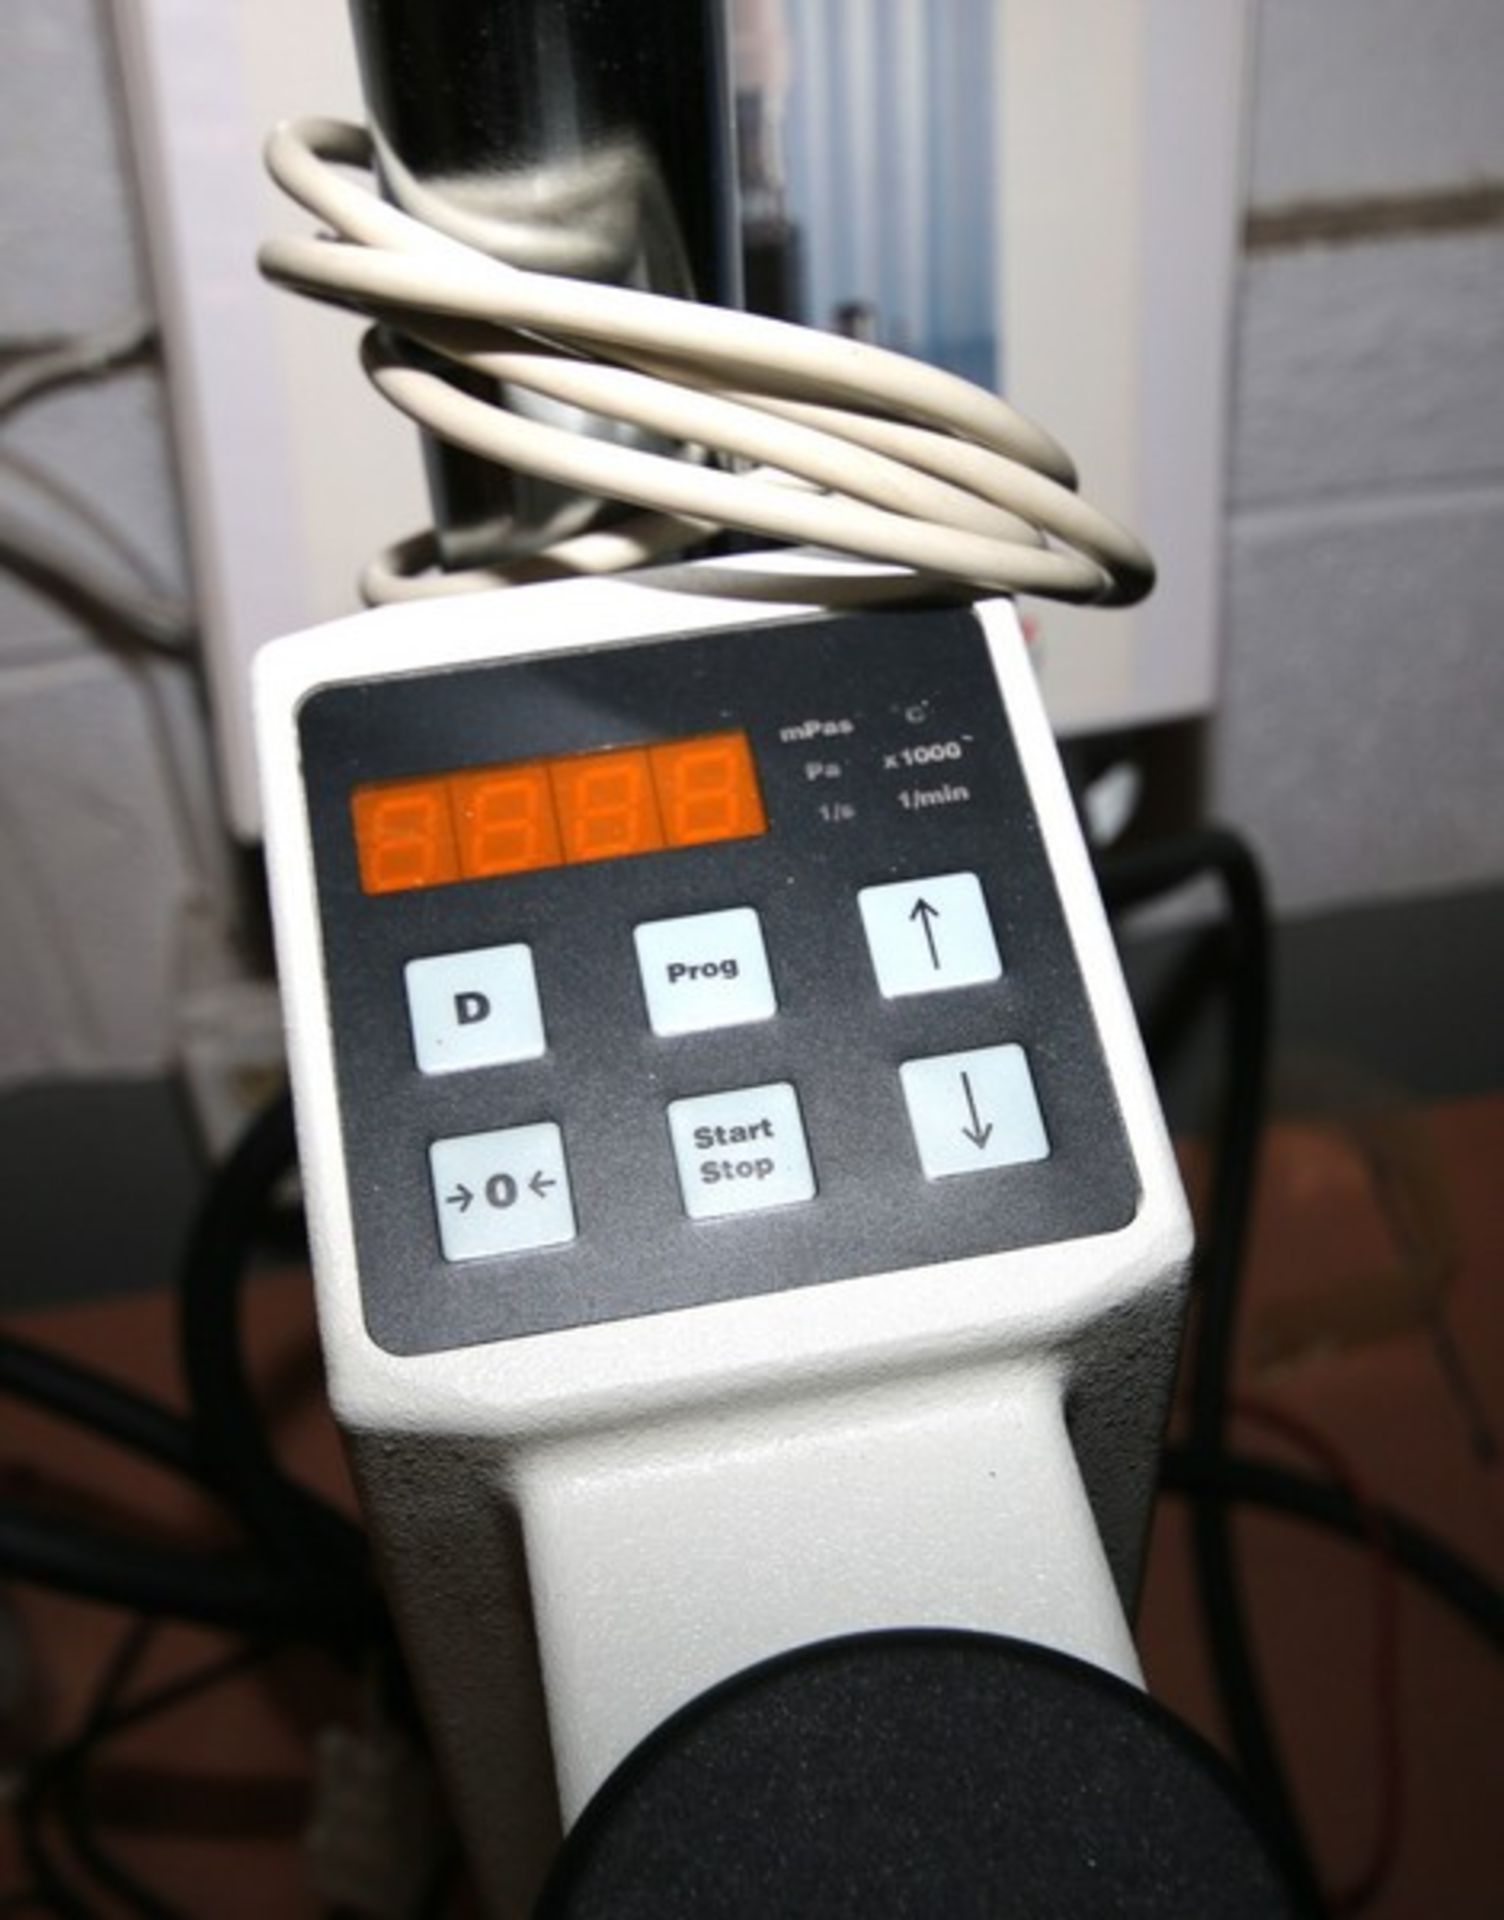 Haake Viscotester, Model 550 Type 002-7026 1 08003704 007, with Heating Chamber Mounted on Stand - Bild 4 aus 7